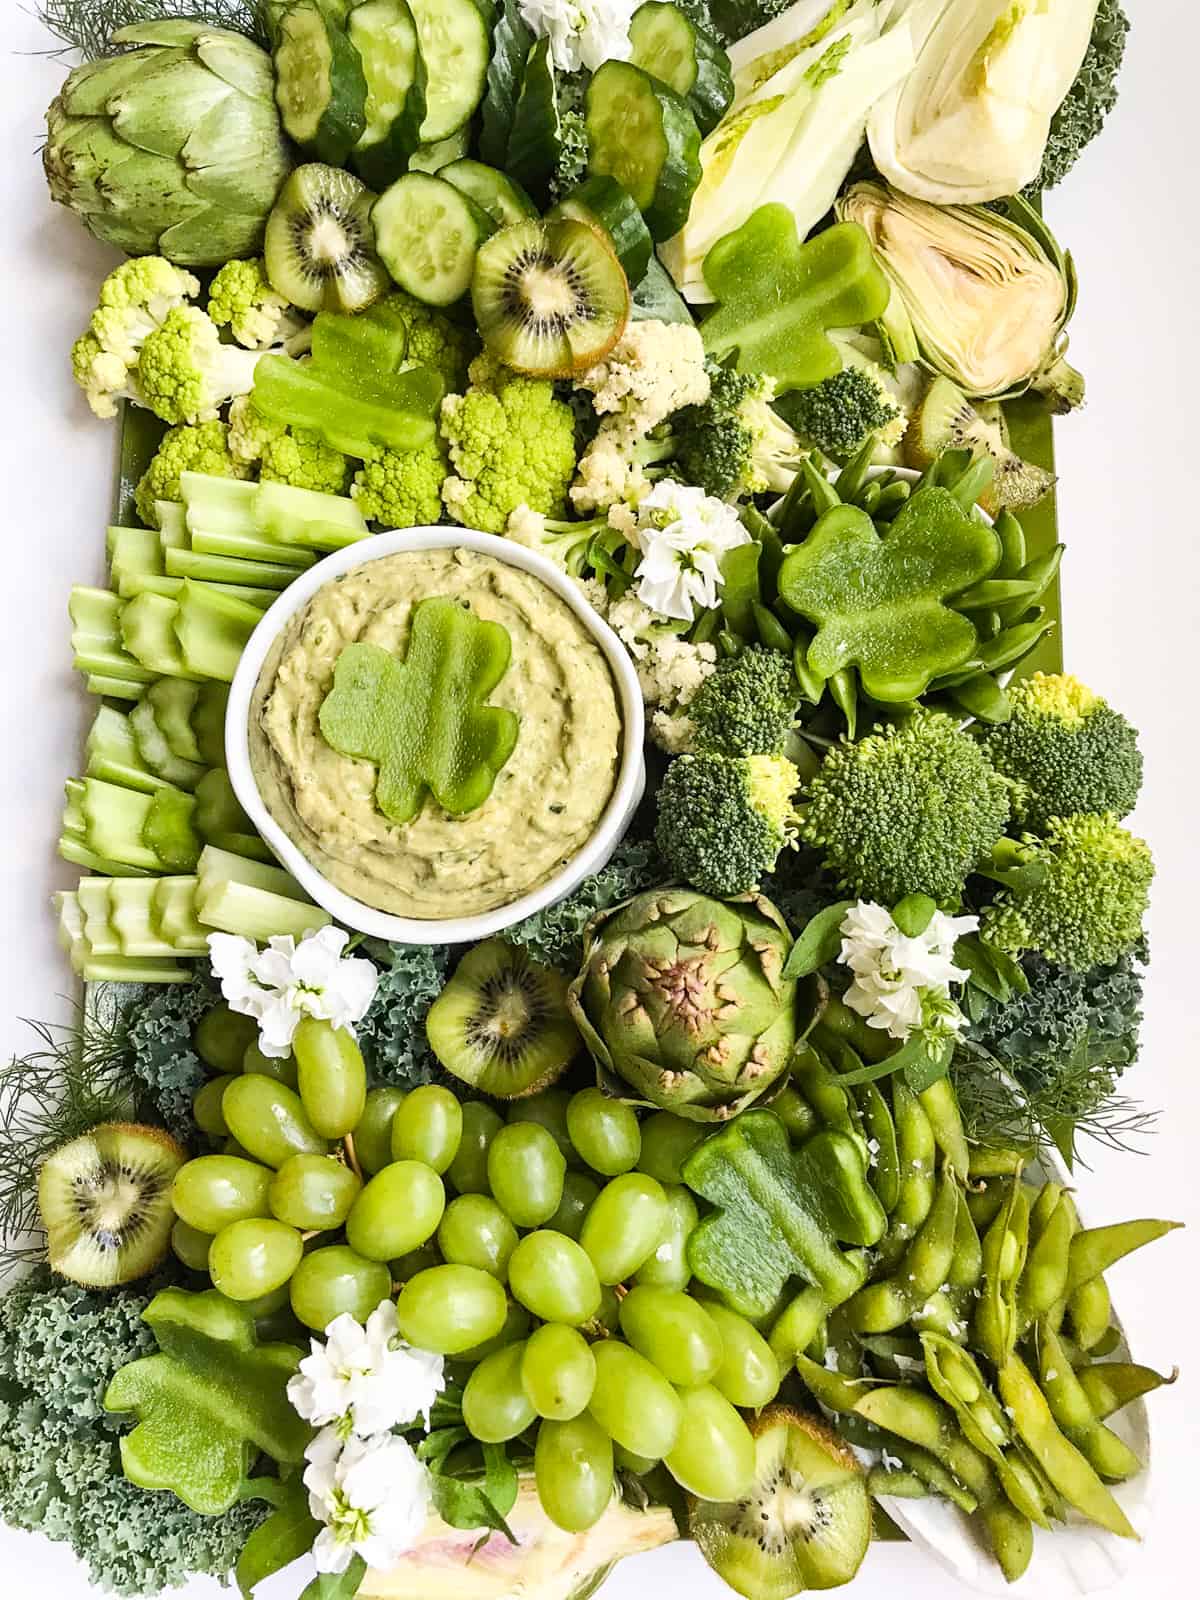 A large tray of green vegetables and a green dip with a shamrock cut out of green bell pepper.